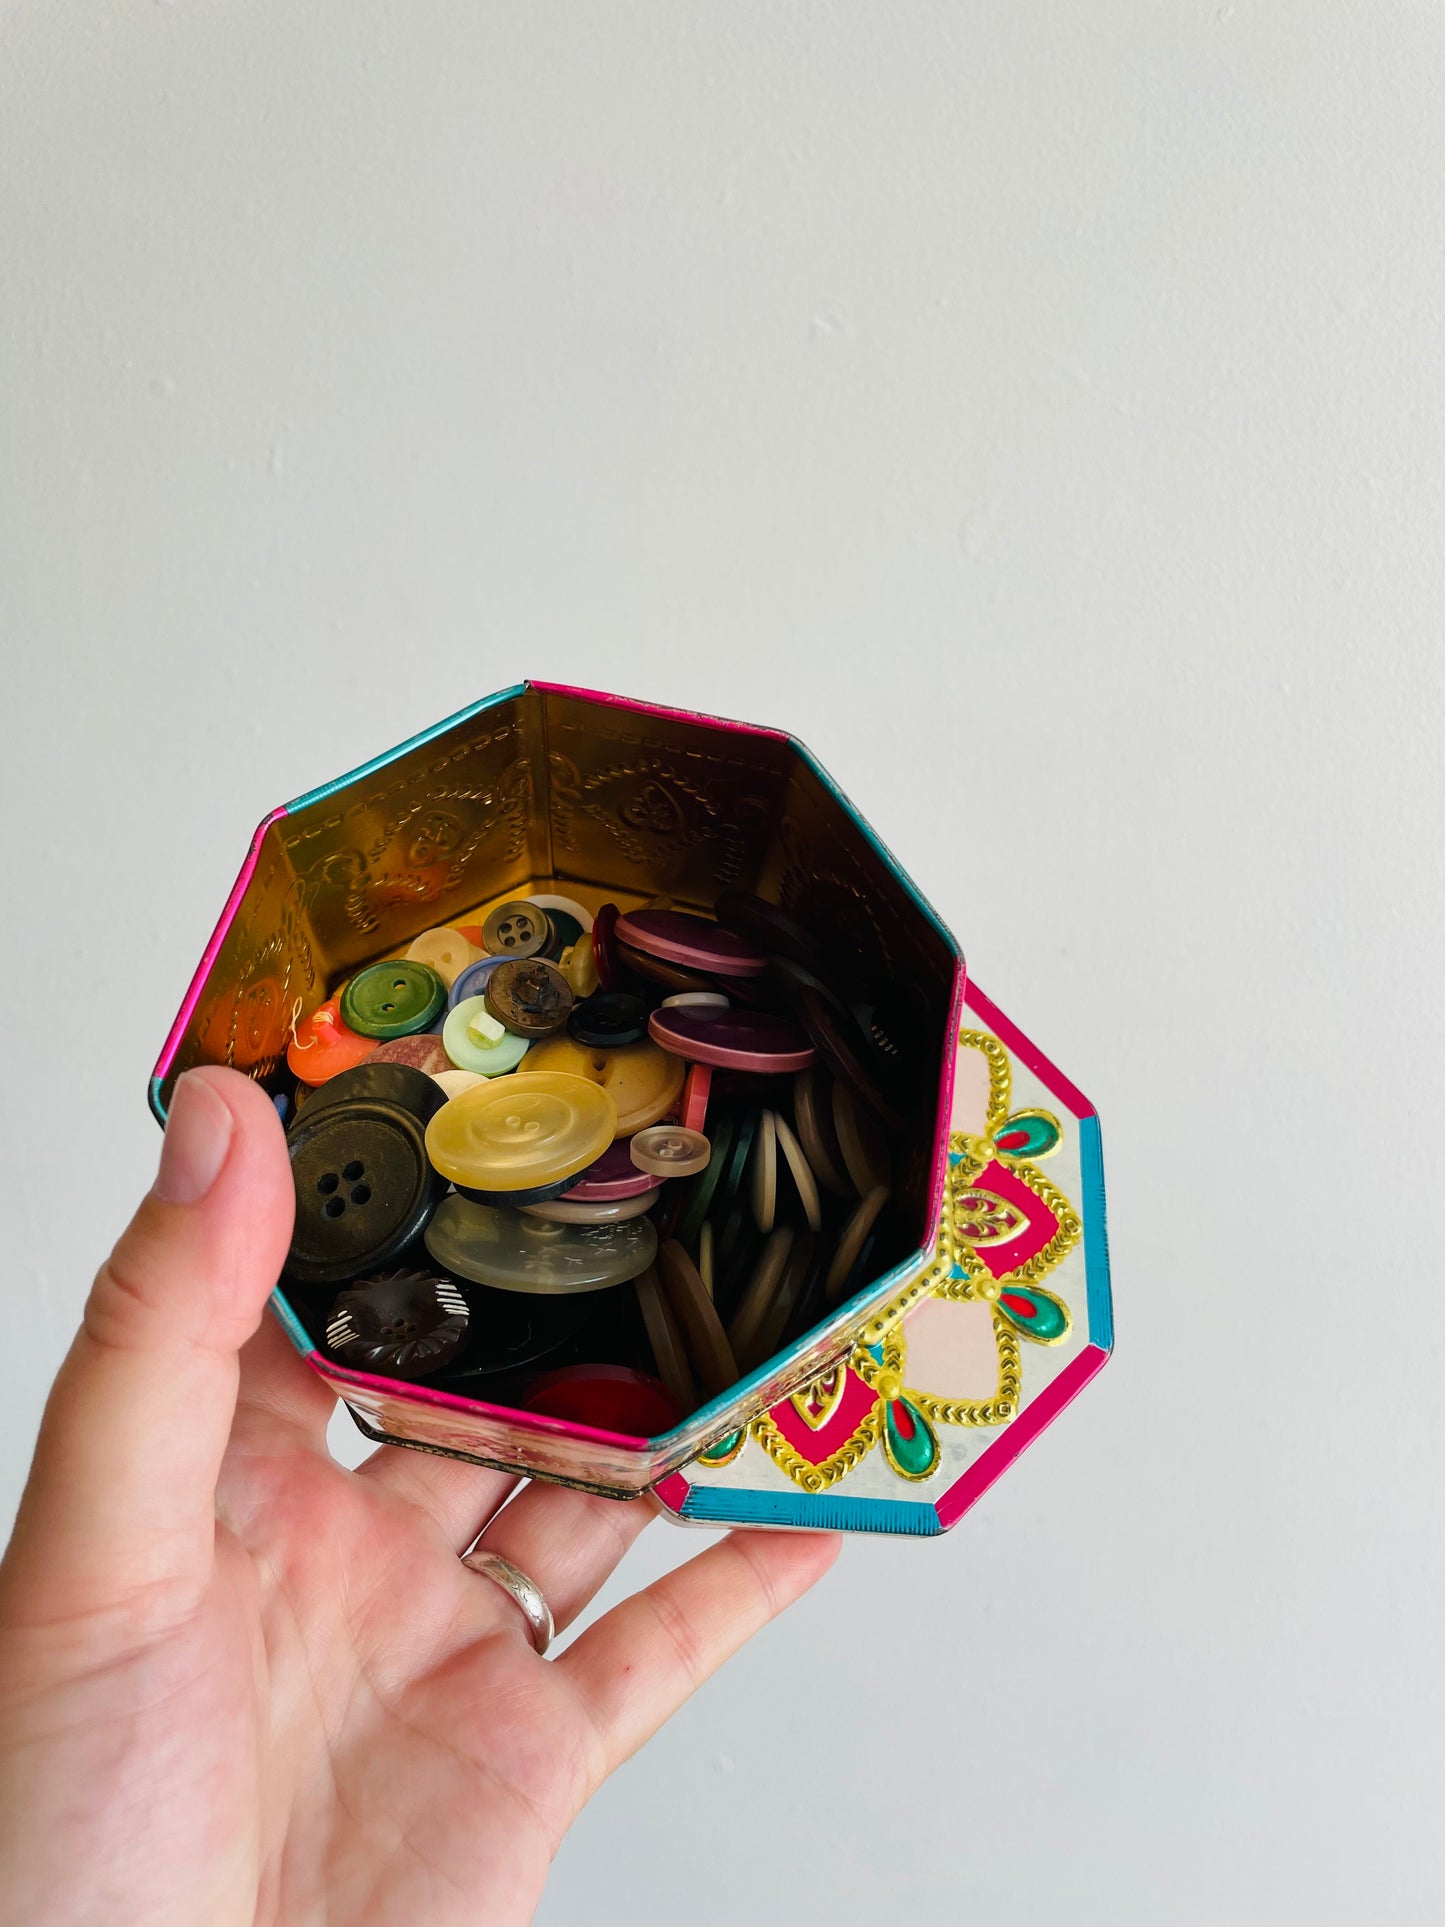 Mystery Button Box - Bright & Fun Tin Container Full of Vintage Buttons